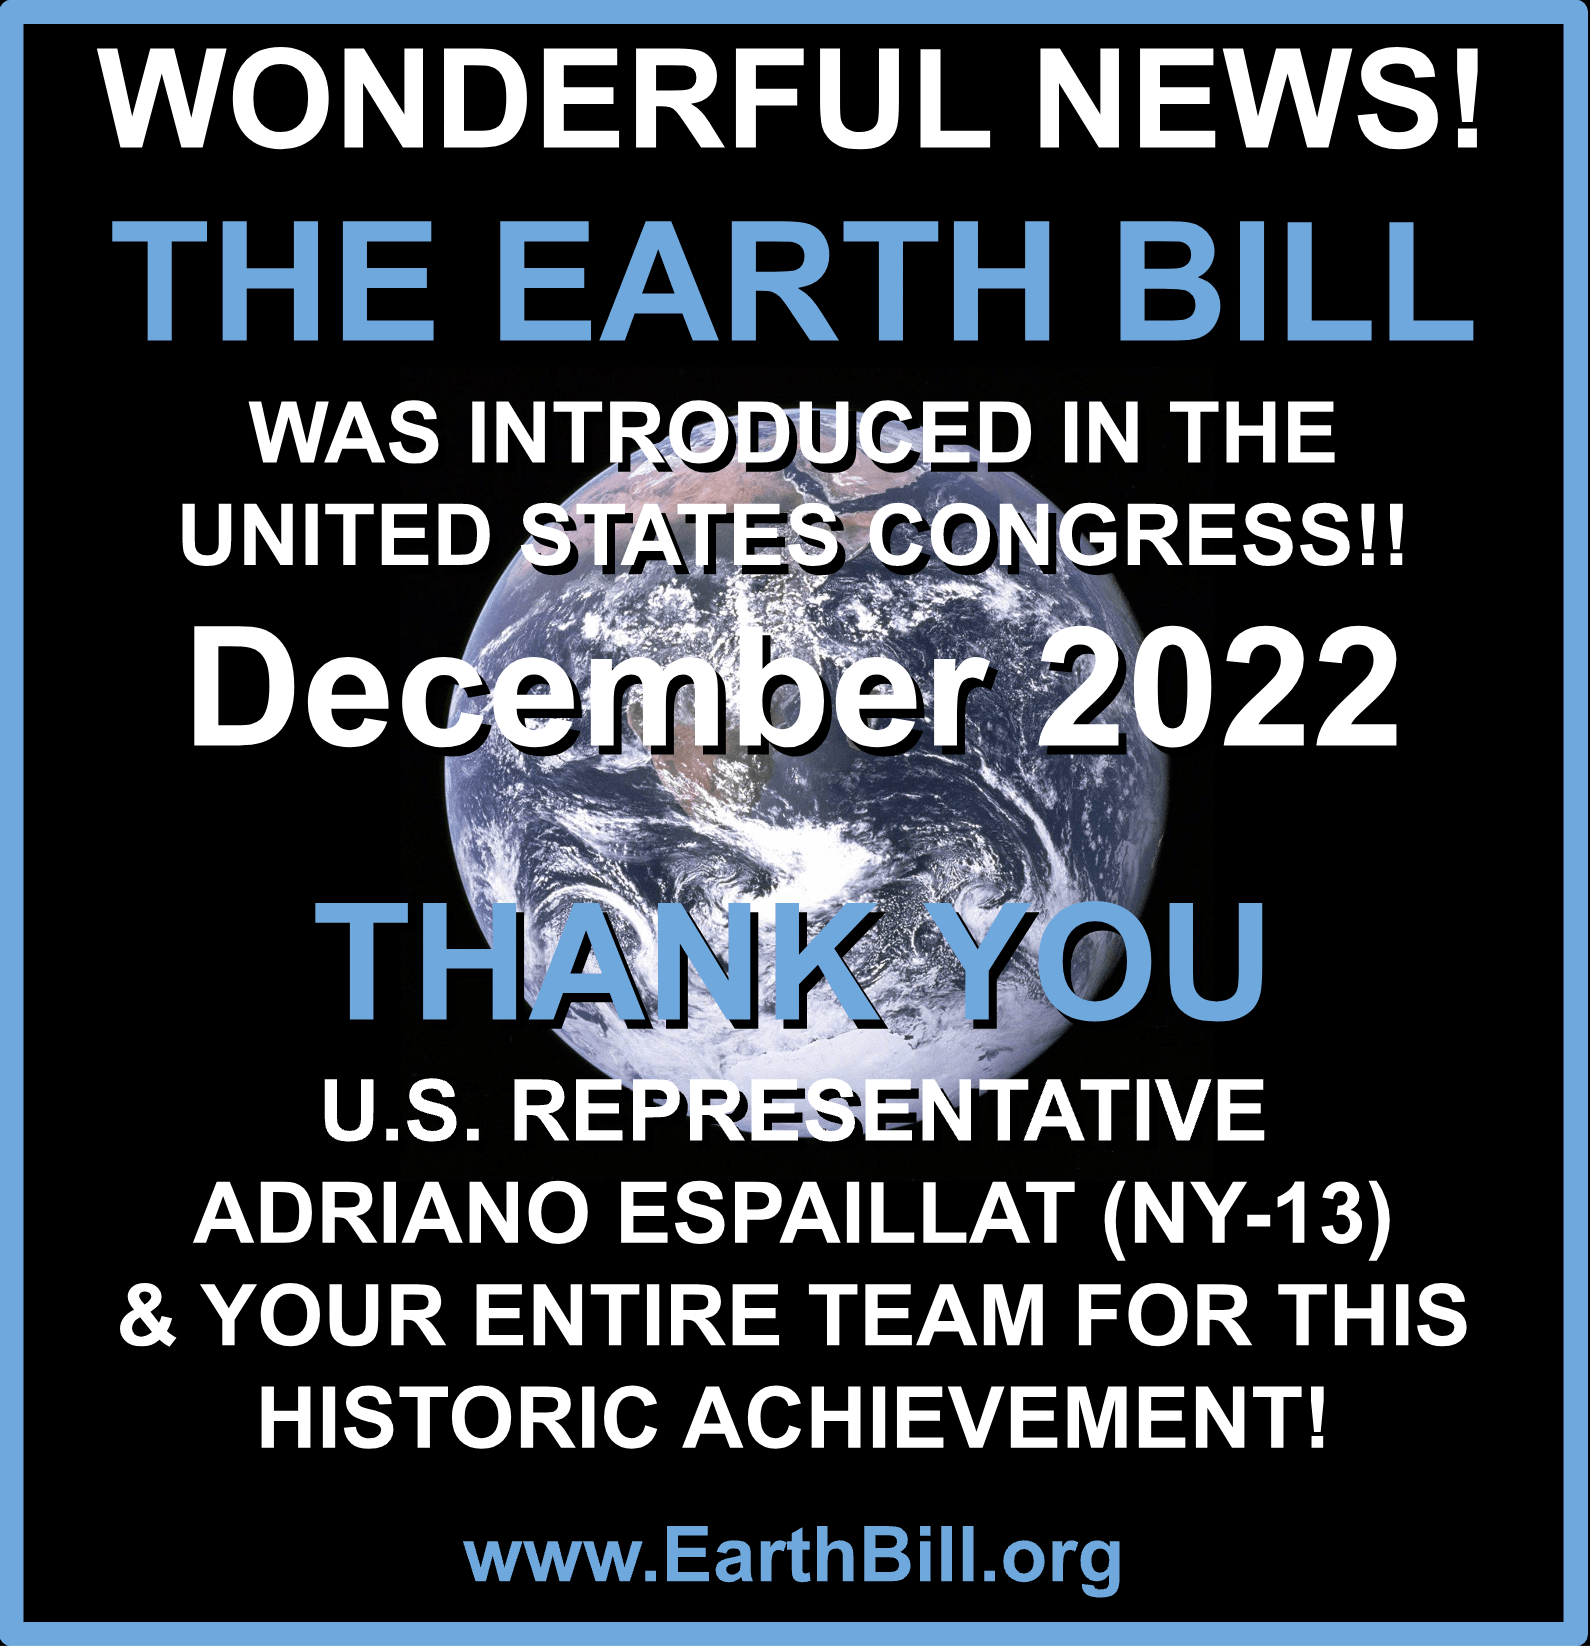 Wonderful news! The Earth Bill was introduced in the United States Congress!! December 2022. Thank you U.S. representative Adriano Espaillat (NY-13) and your entire team for this historic achievement! www.earthbill.org